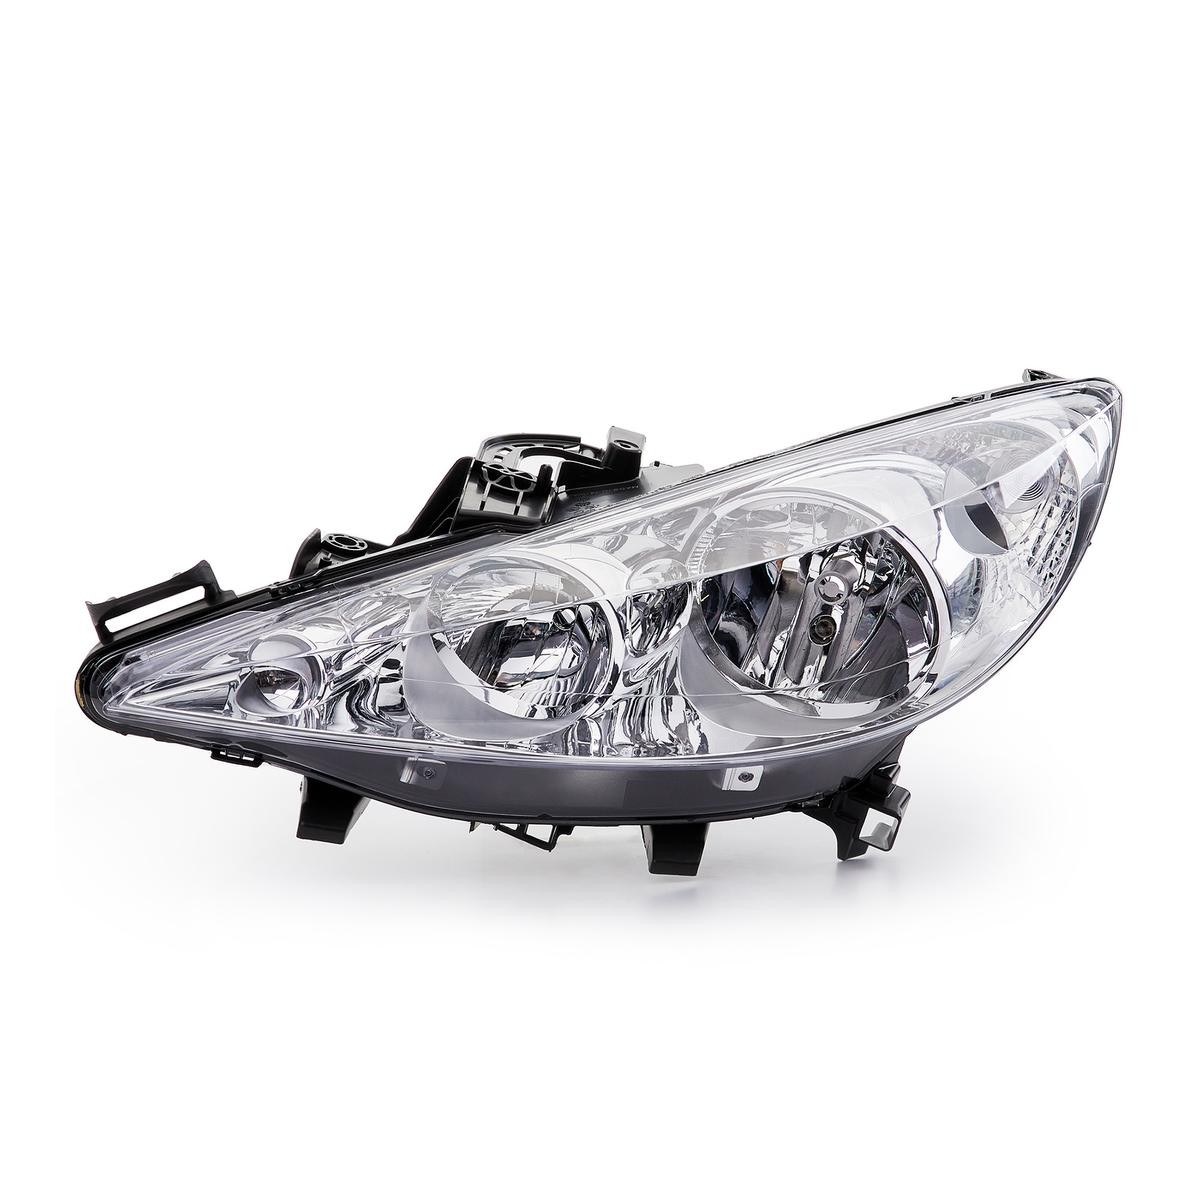 Front headlights 2751283 in original quality